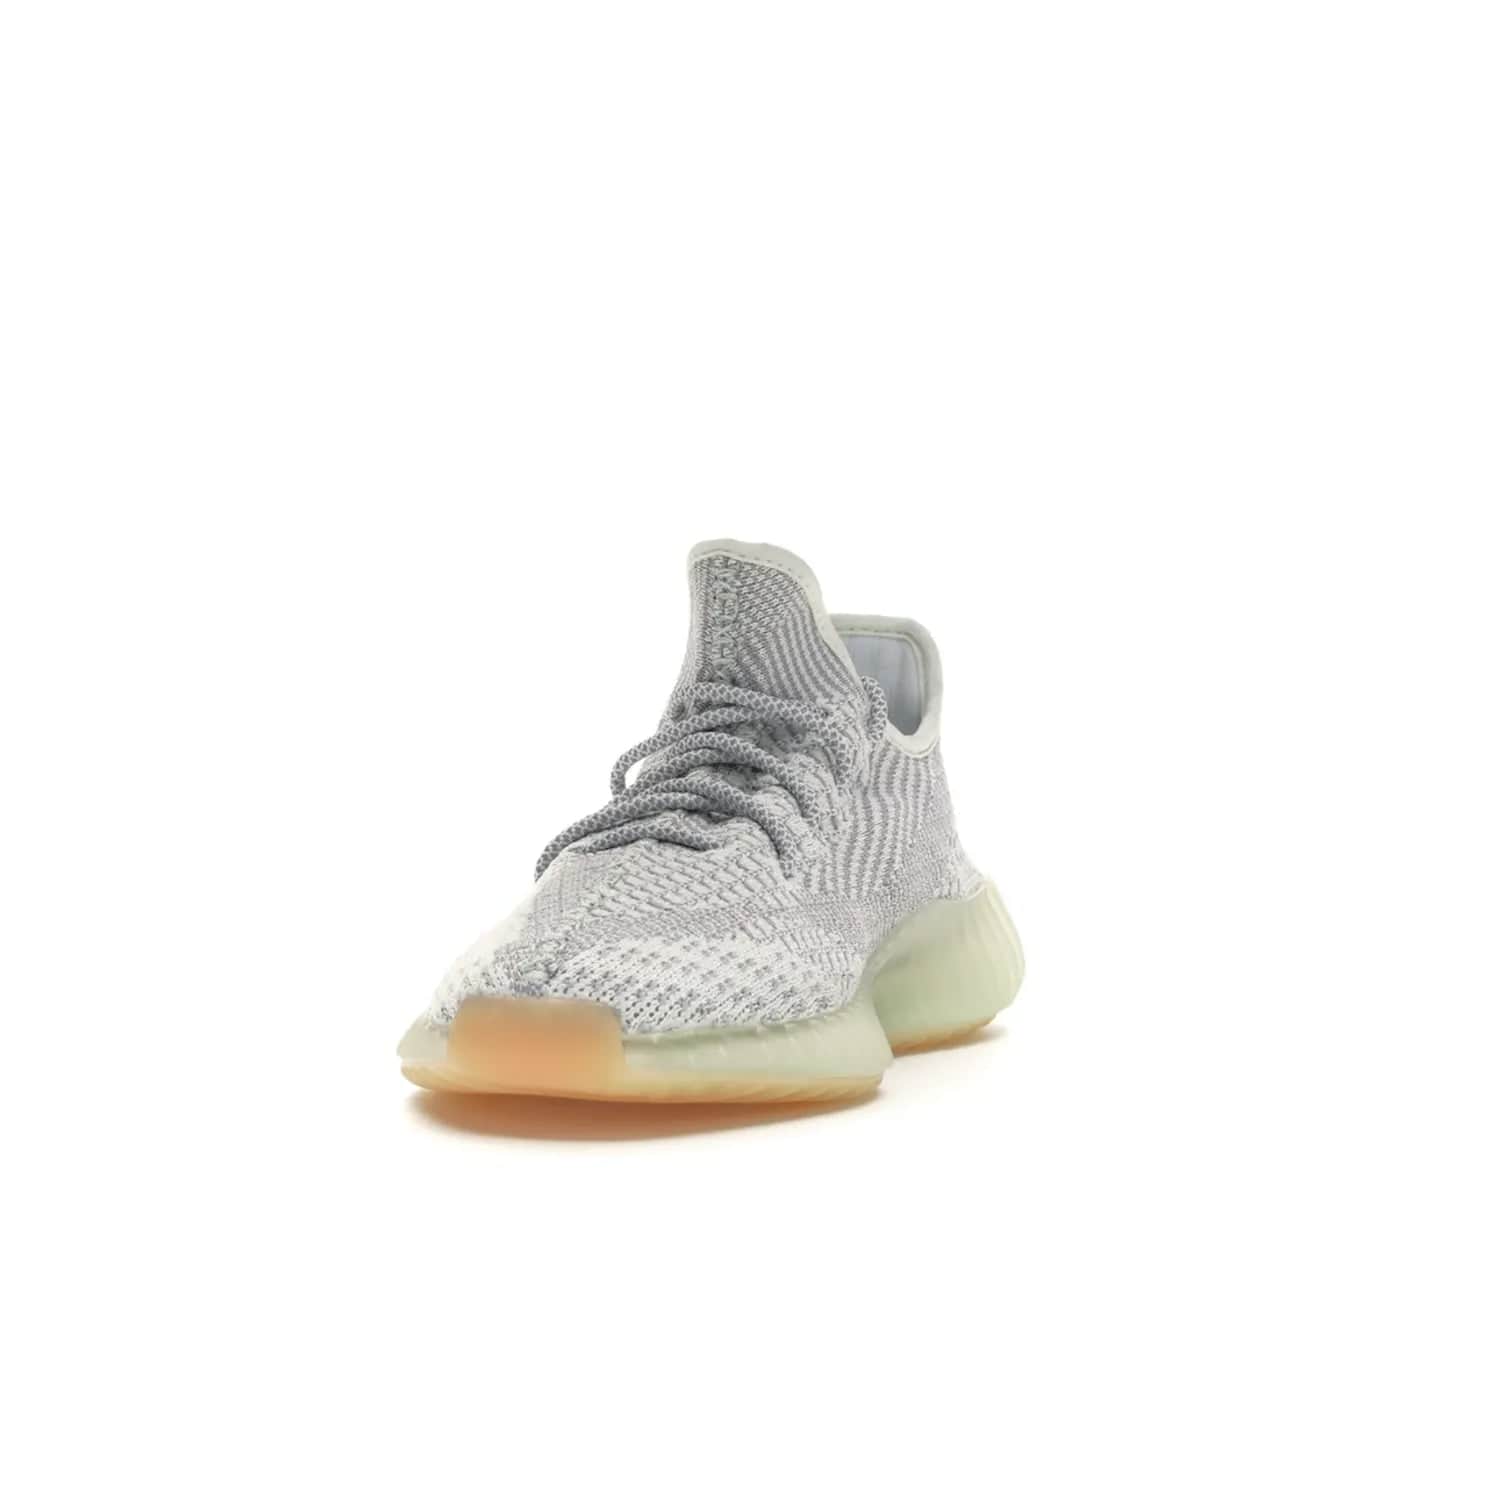 adidas Yeezy Boost 350 V2 Yeshaya (Non-Reflective) - Image 12 - Only at www.BallersClubKickz.com - Step out in style with the adidas Yeezy Boost 350 V2 Yeshaya (Non-Reflective). Gray-and-white Primeknit upper with mesh side stripe & rope laces, plus a translucent Boost sole with a hint of yellow. Make a statement and feel comfortable with this stylish sneaker.